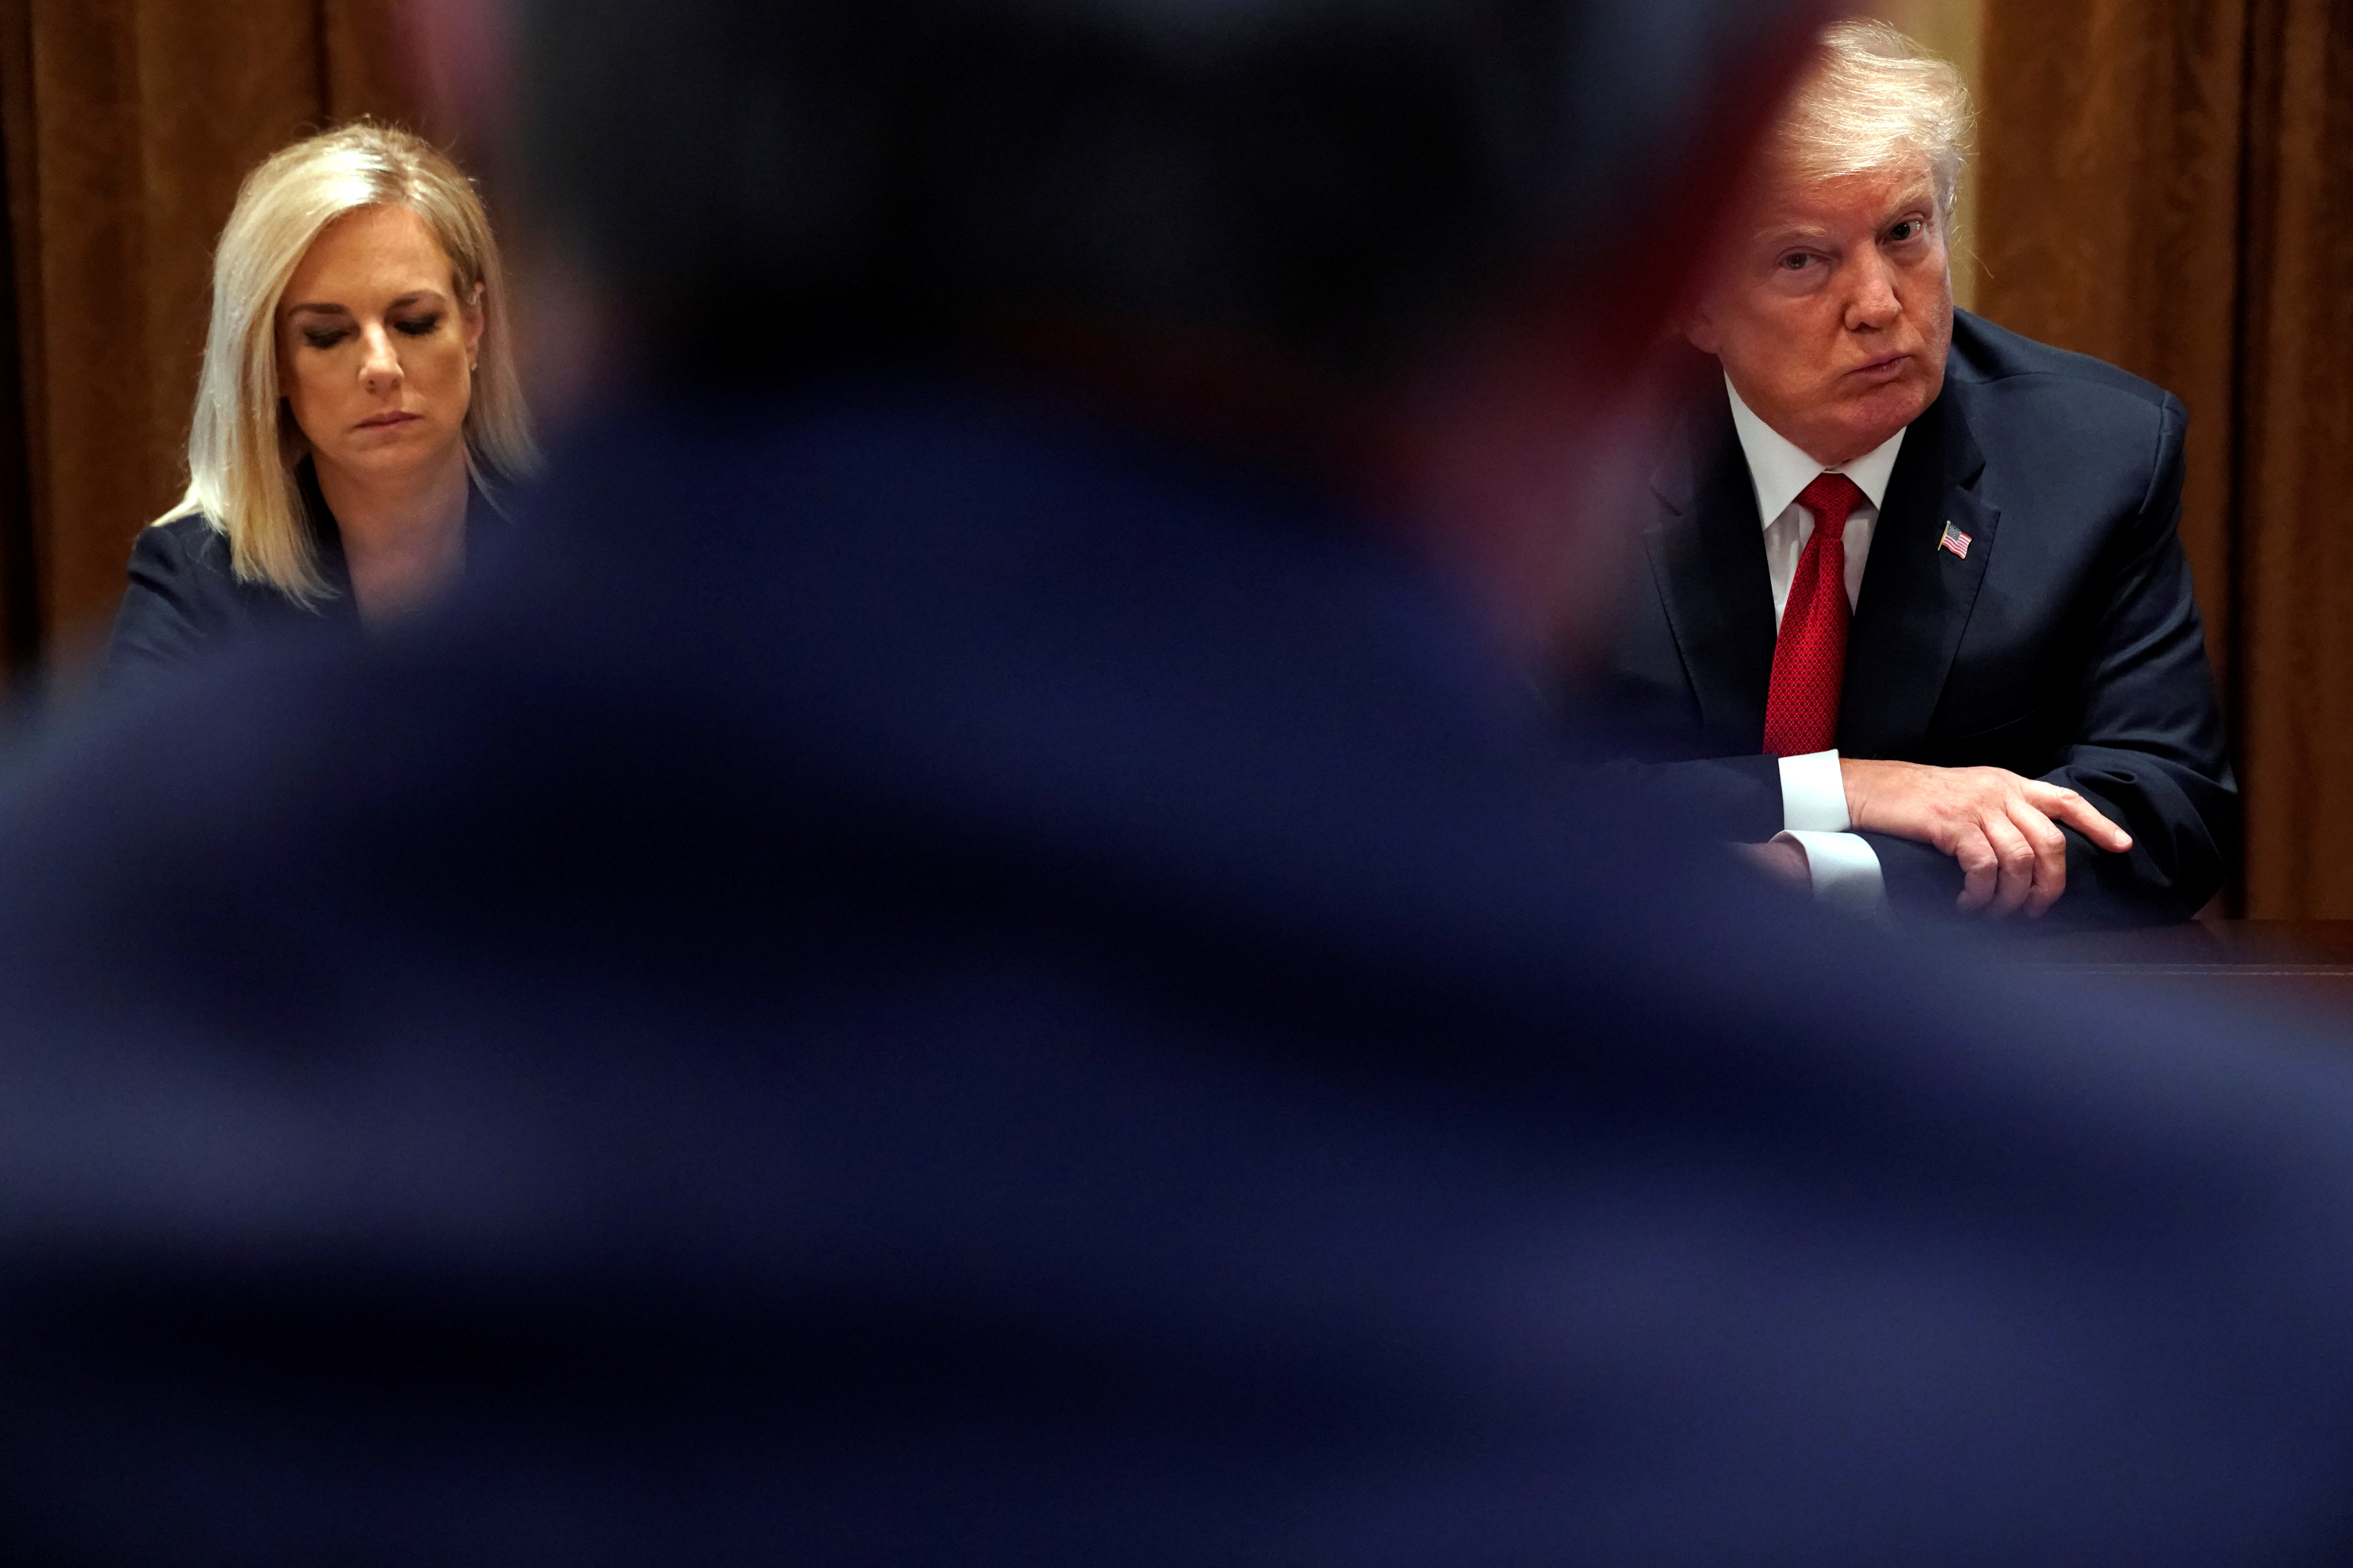 President Donald Trump, flanked by Secretary of Homeland Security Kirstjen Nielsen, meets with members of Congress and U.S. law enforcement about crime and immigration issues, specifically the MS-13 gang, at the White House in Washington, February 6, 2018. REUTERS/Jonathan Ernst